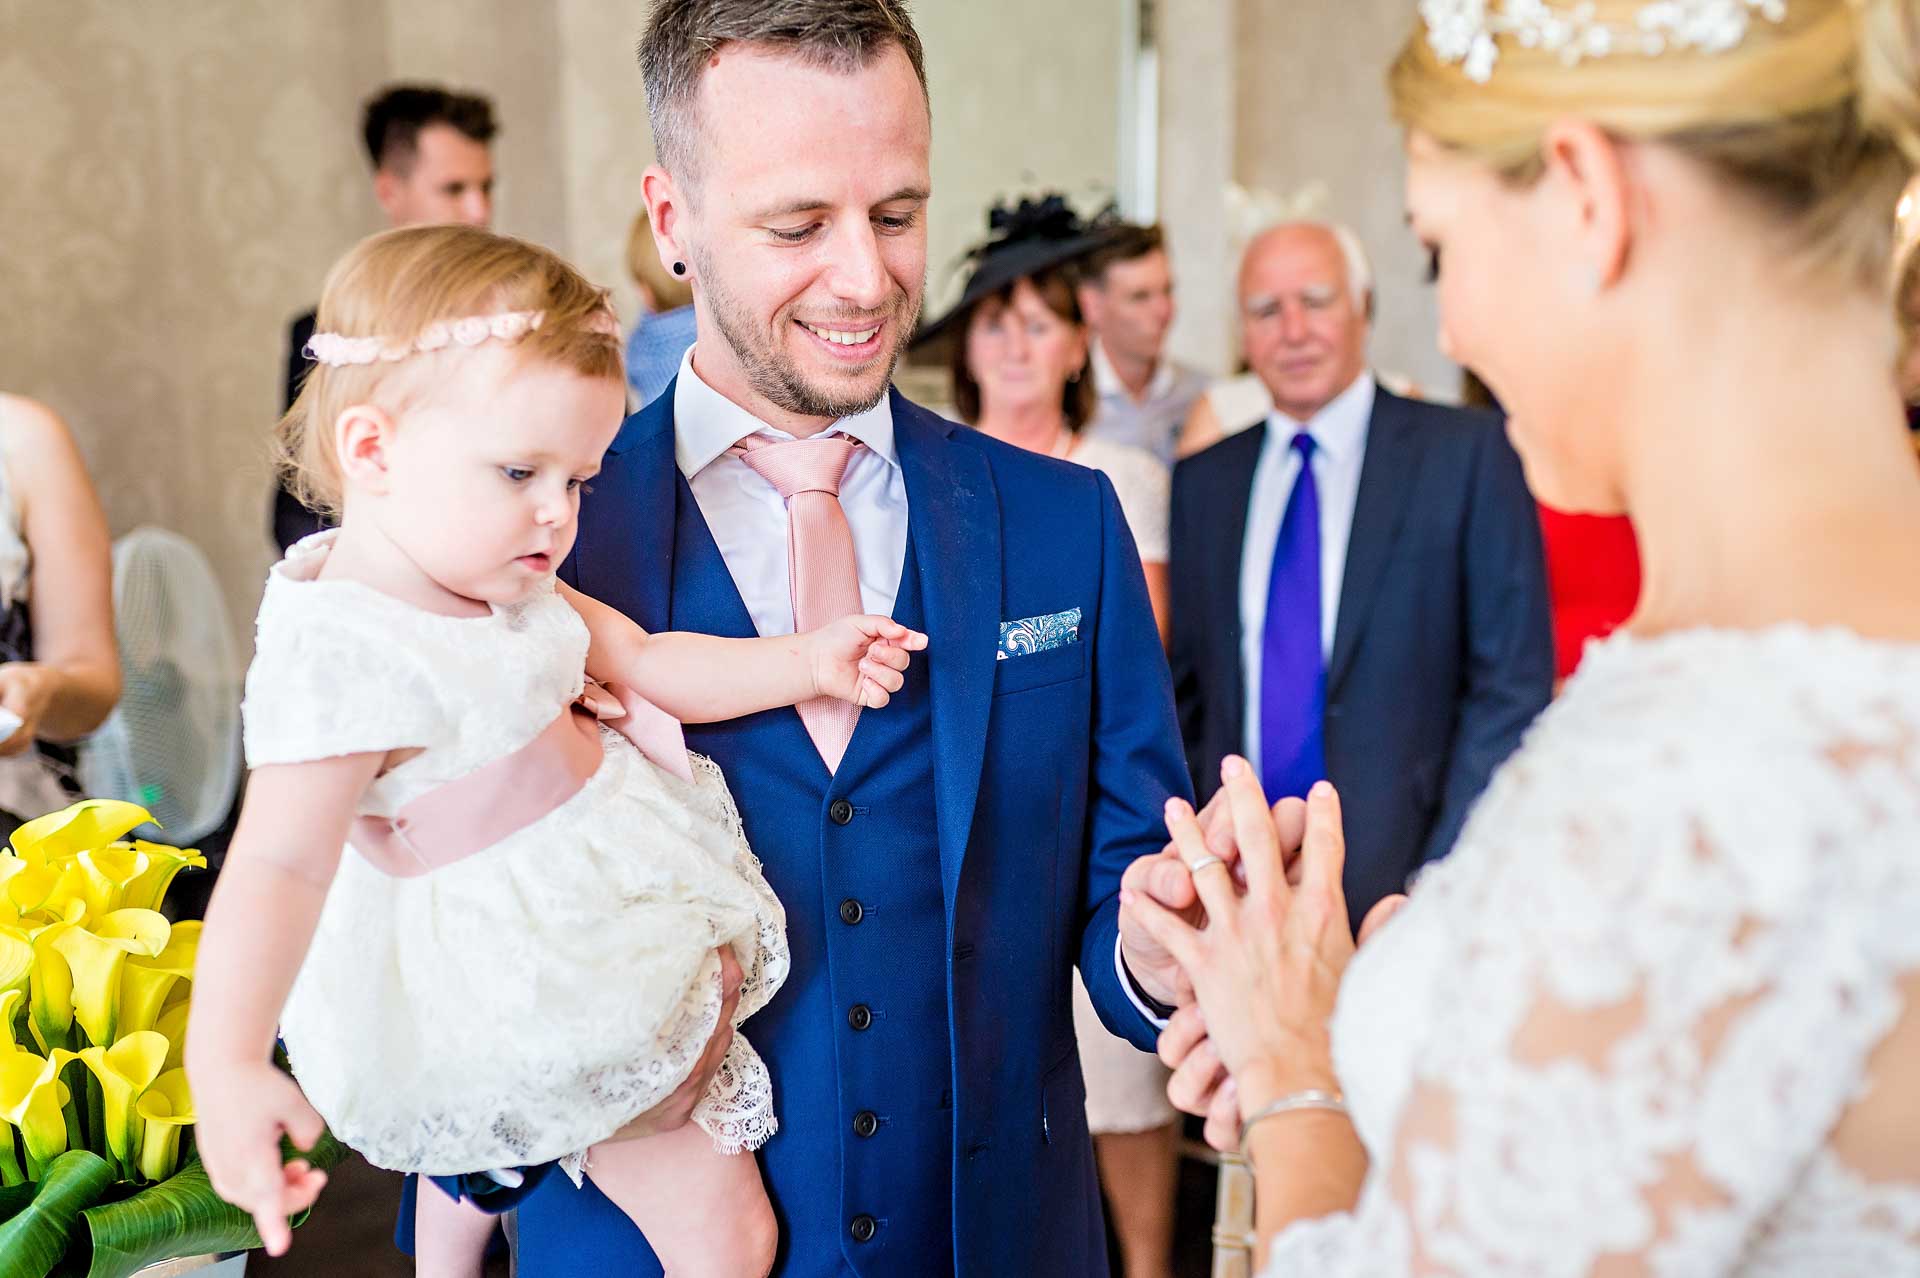 Short Notice Wedding in South London - Groom with Baby Placing Ring on Bride's Finger